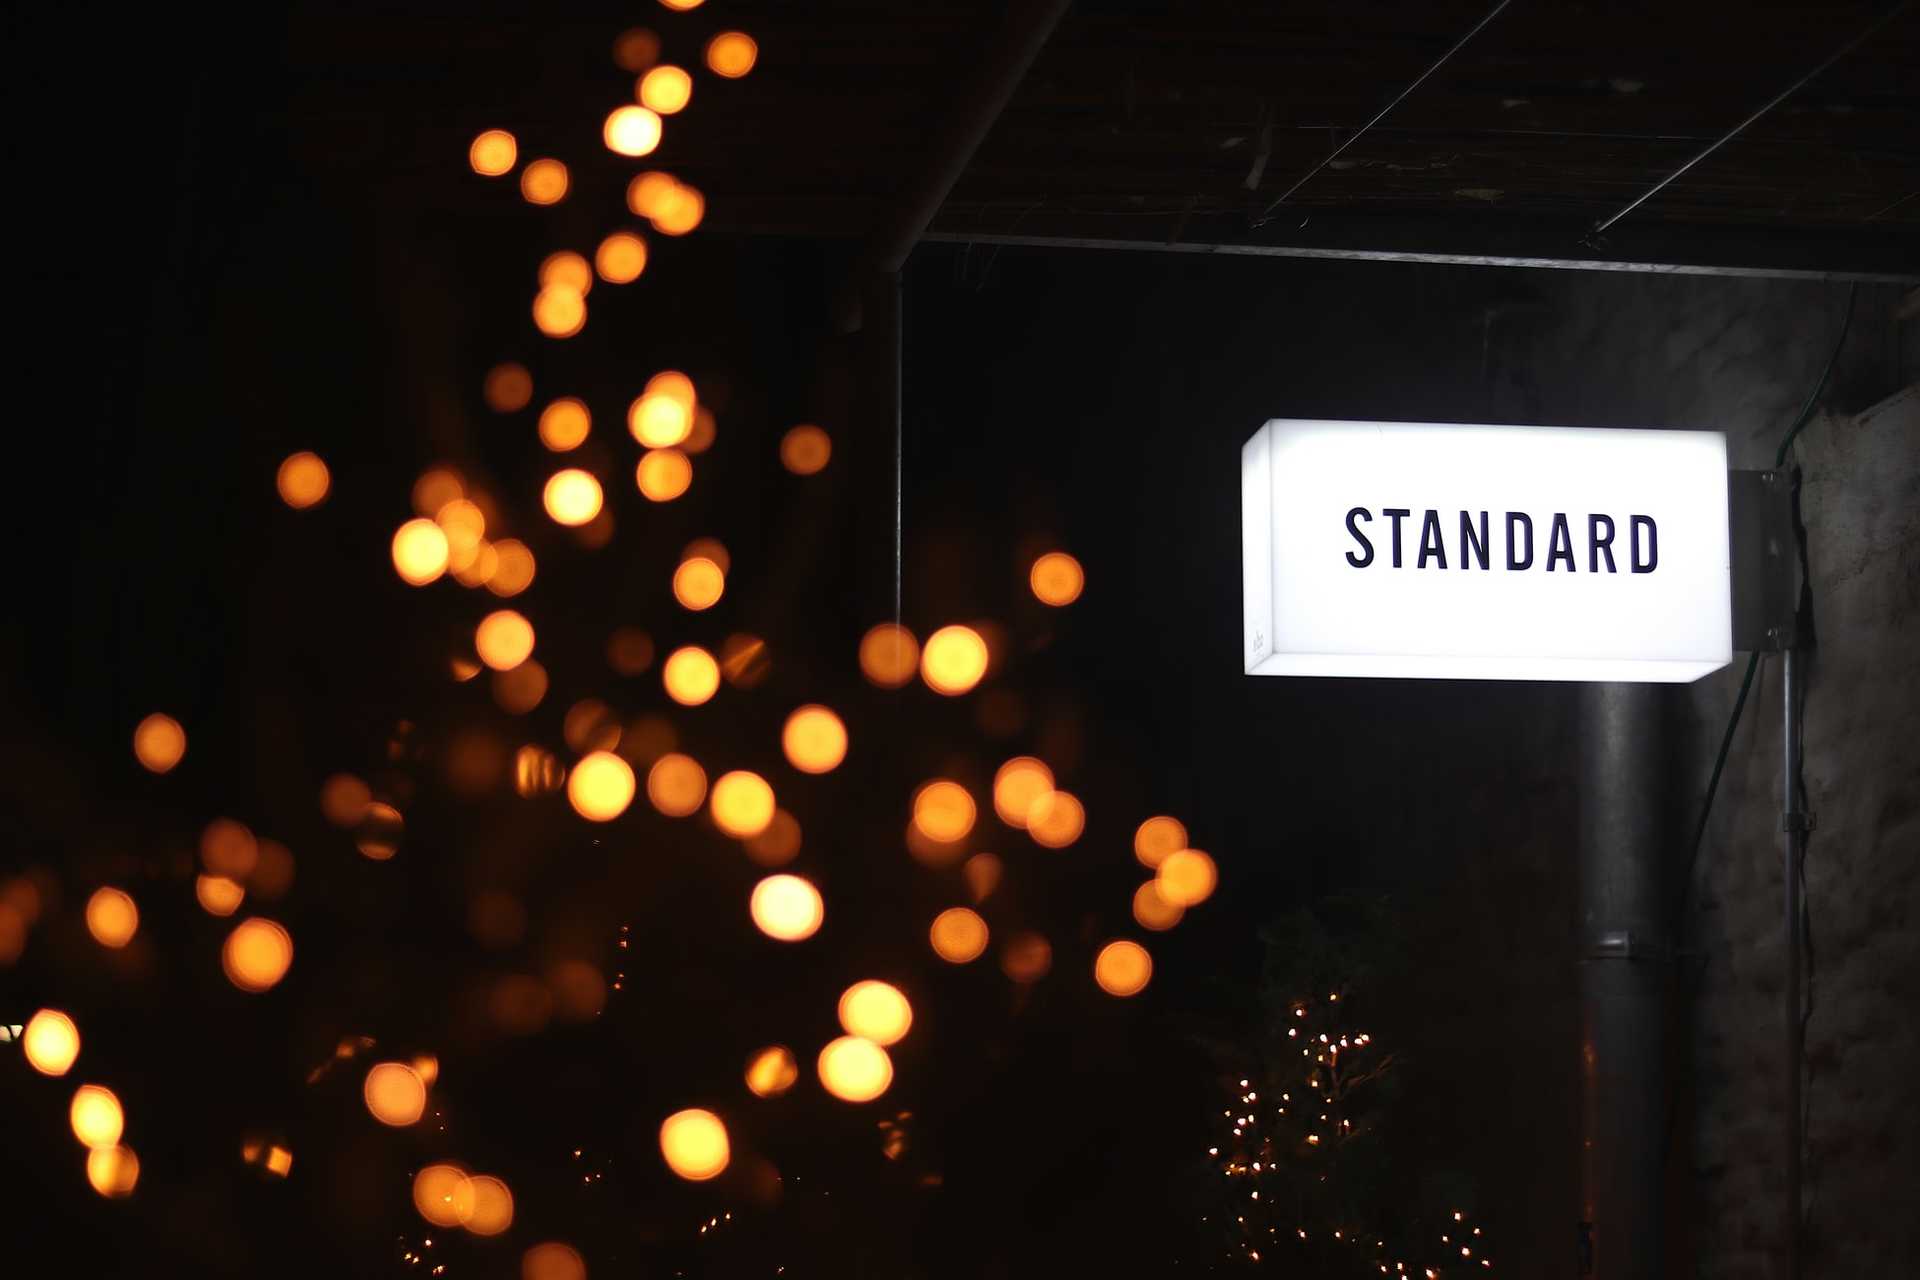 Sign on a business reading "Standard"